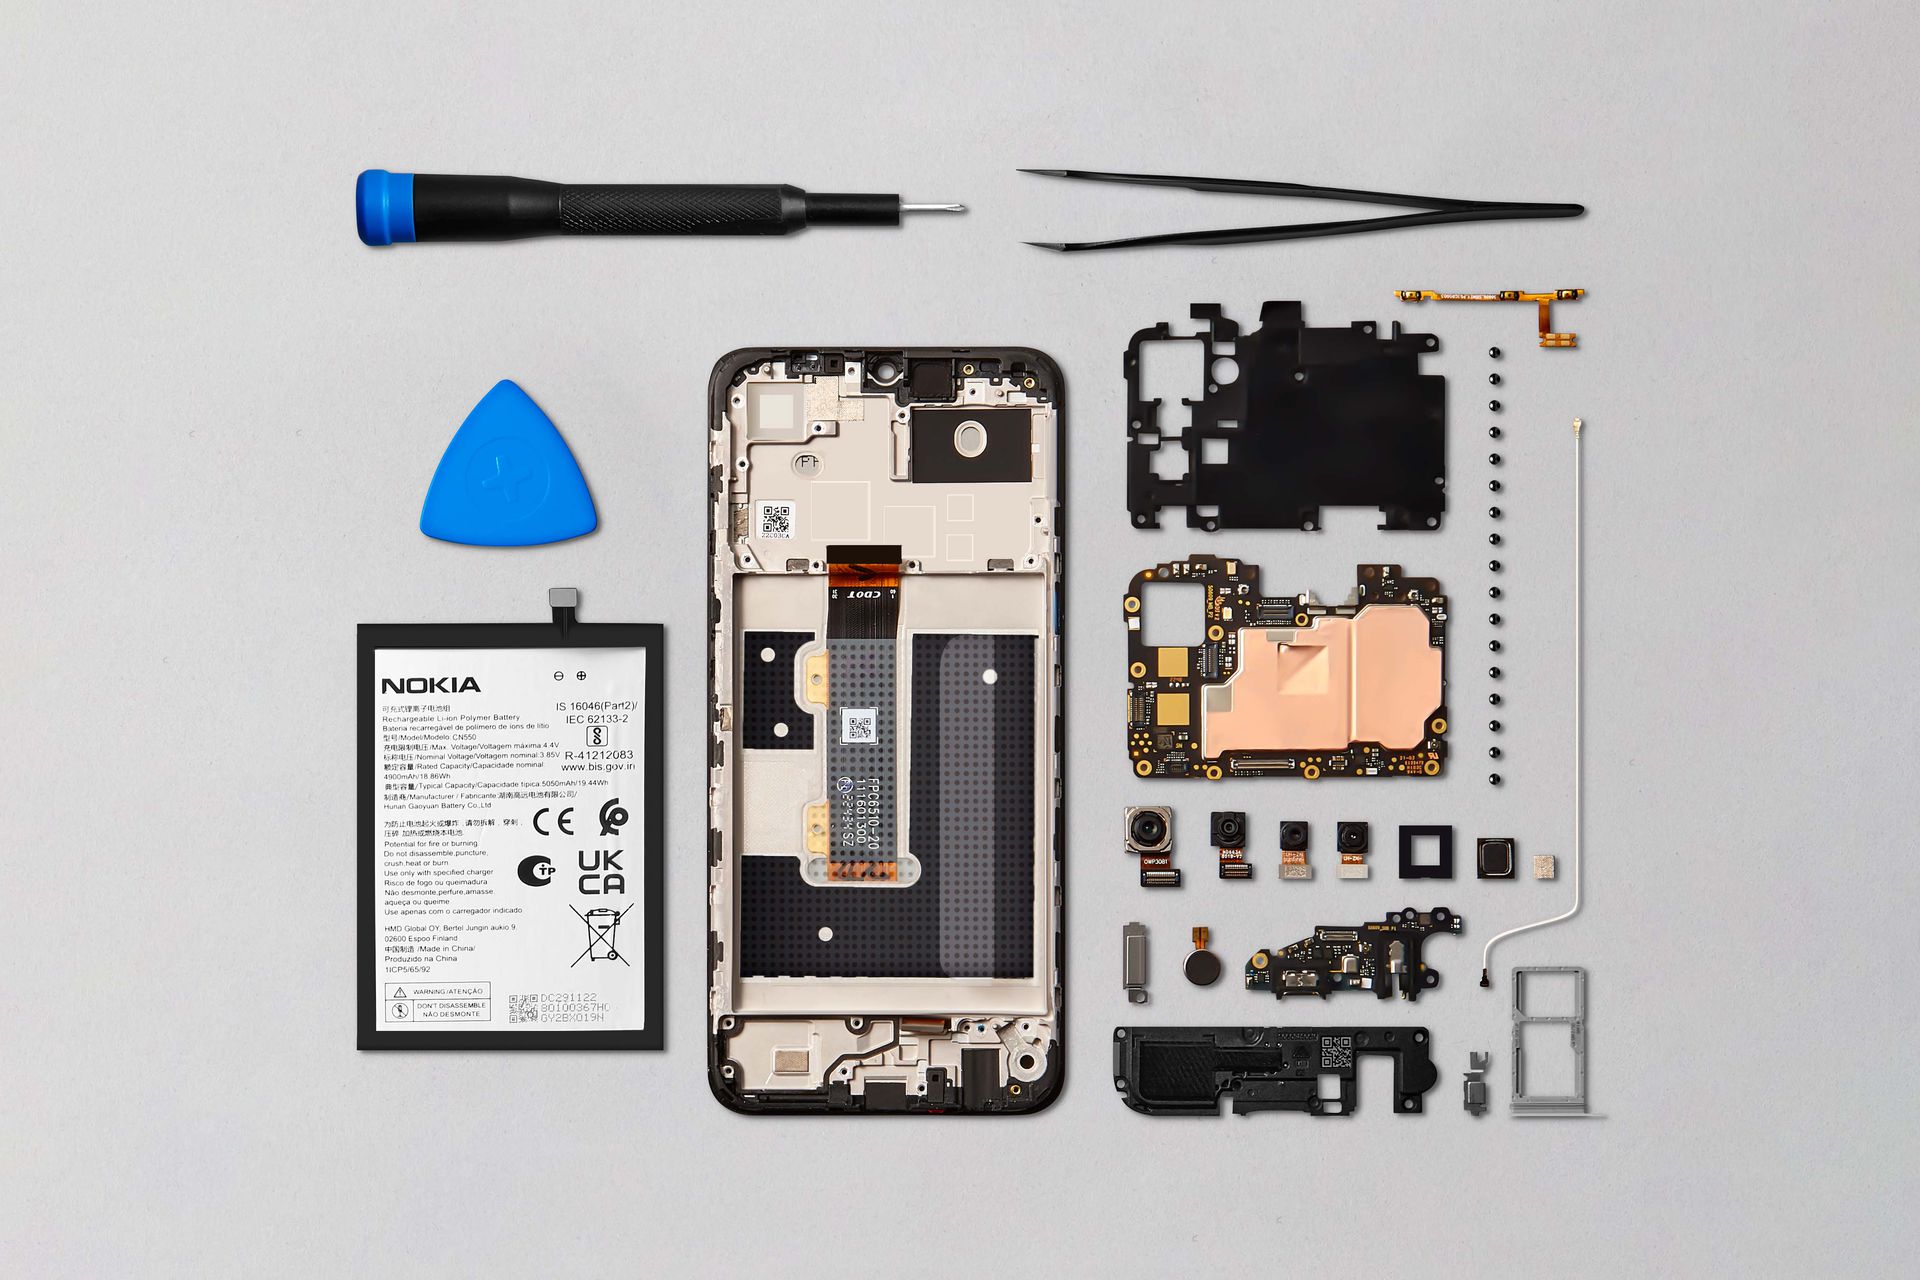 Can be repaired in minutes: HMD showed the Nokia G22 smartphone at MWC